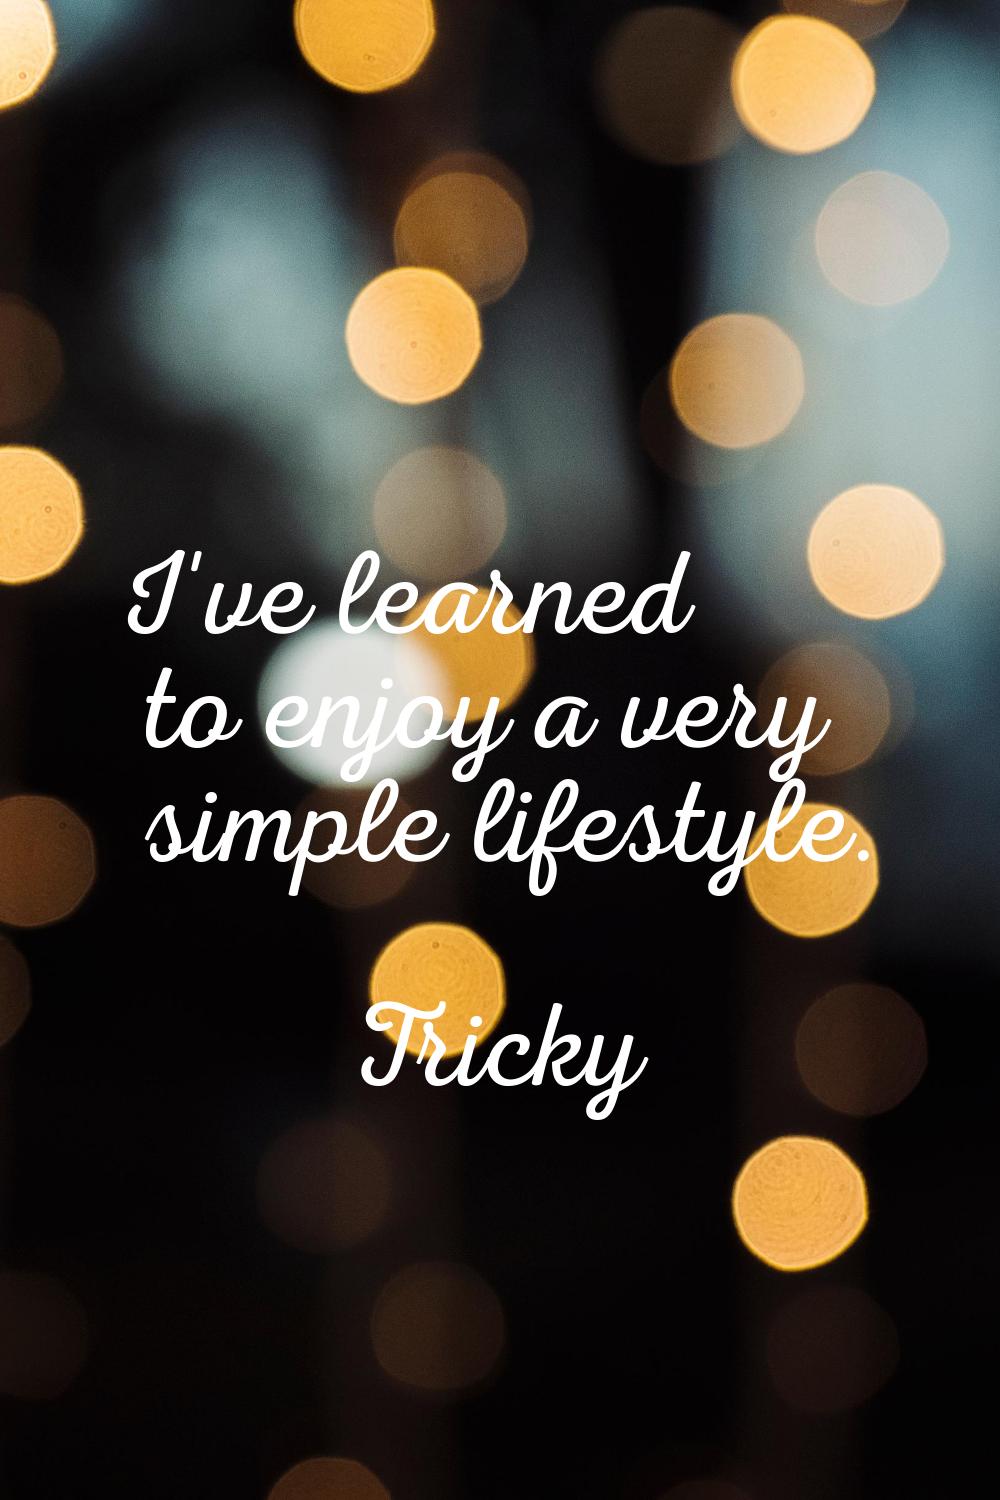 I've learned to enjoy a very simple lifestyle.